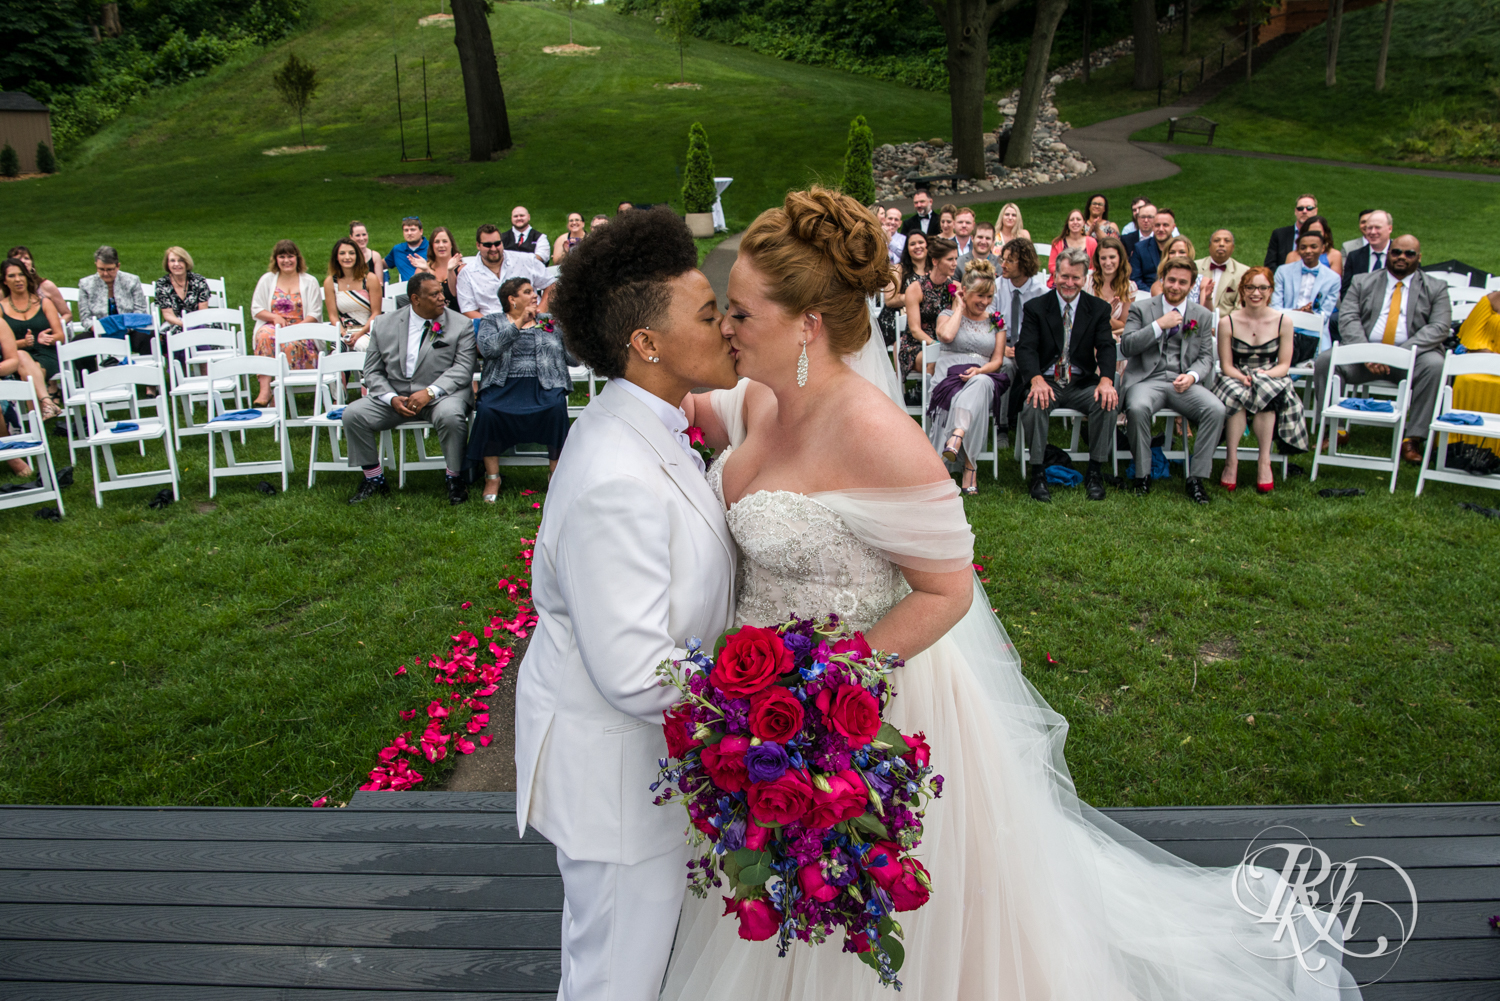 Lesbian wedding first kiss with guests in background